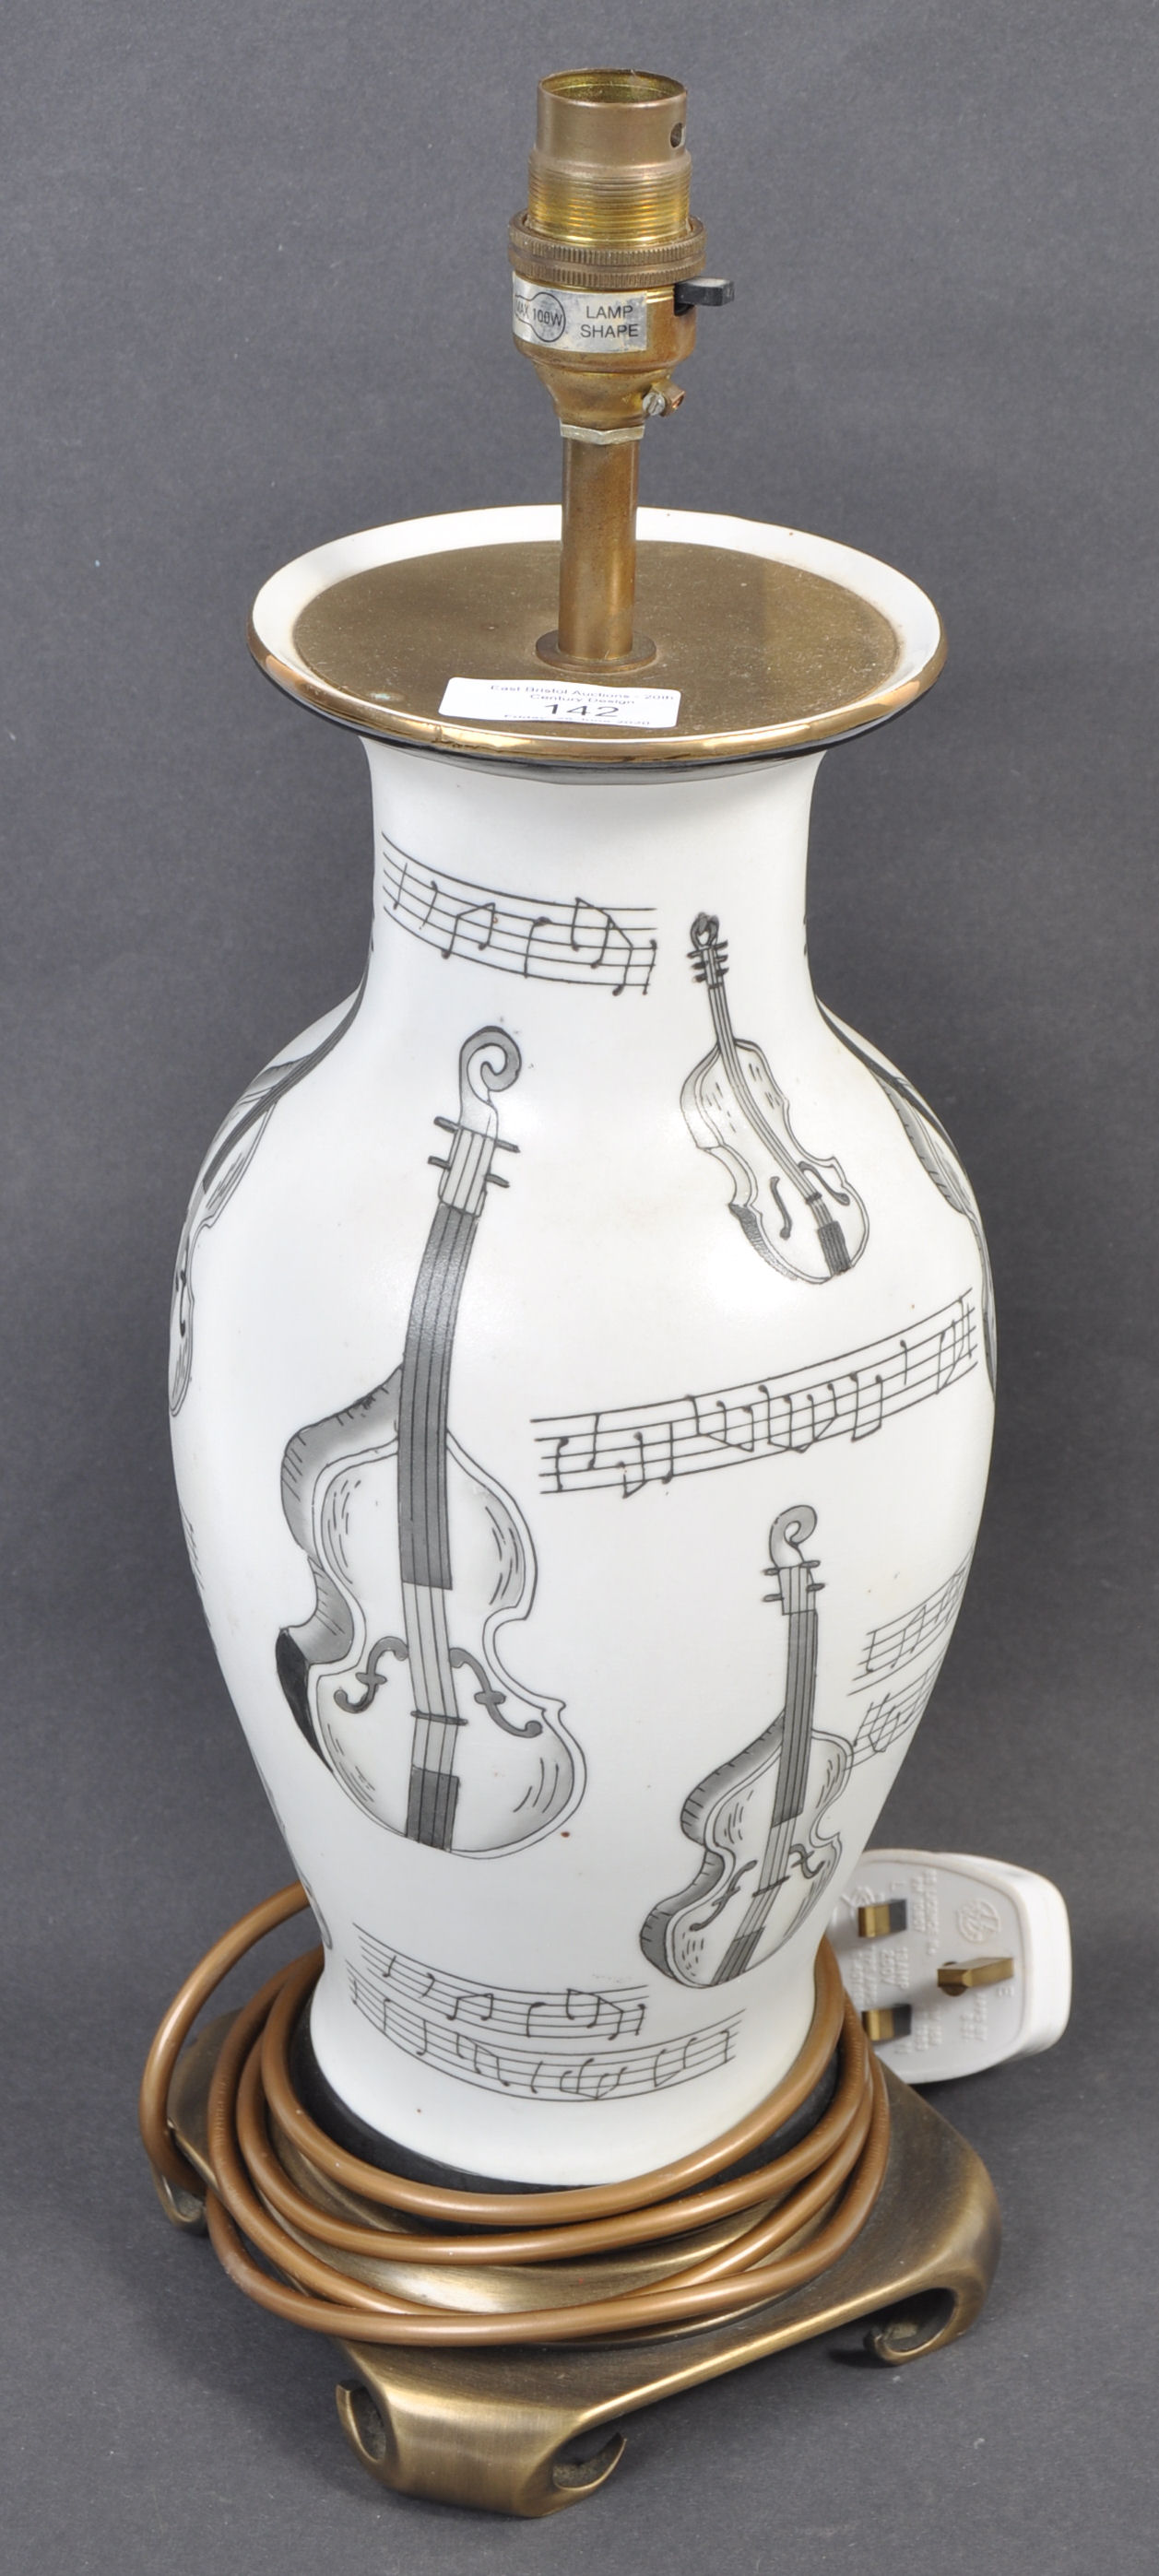 RETRO 20TH CENTURY POTTERY TABLE LAMP WITH MUSICAL DESIGN - Image 2 of 5